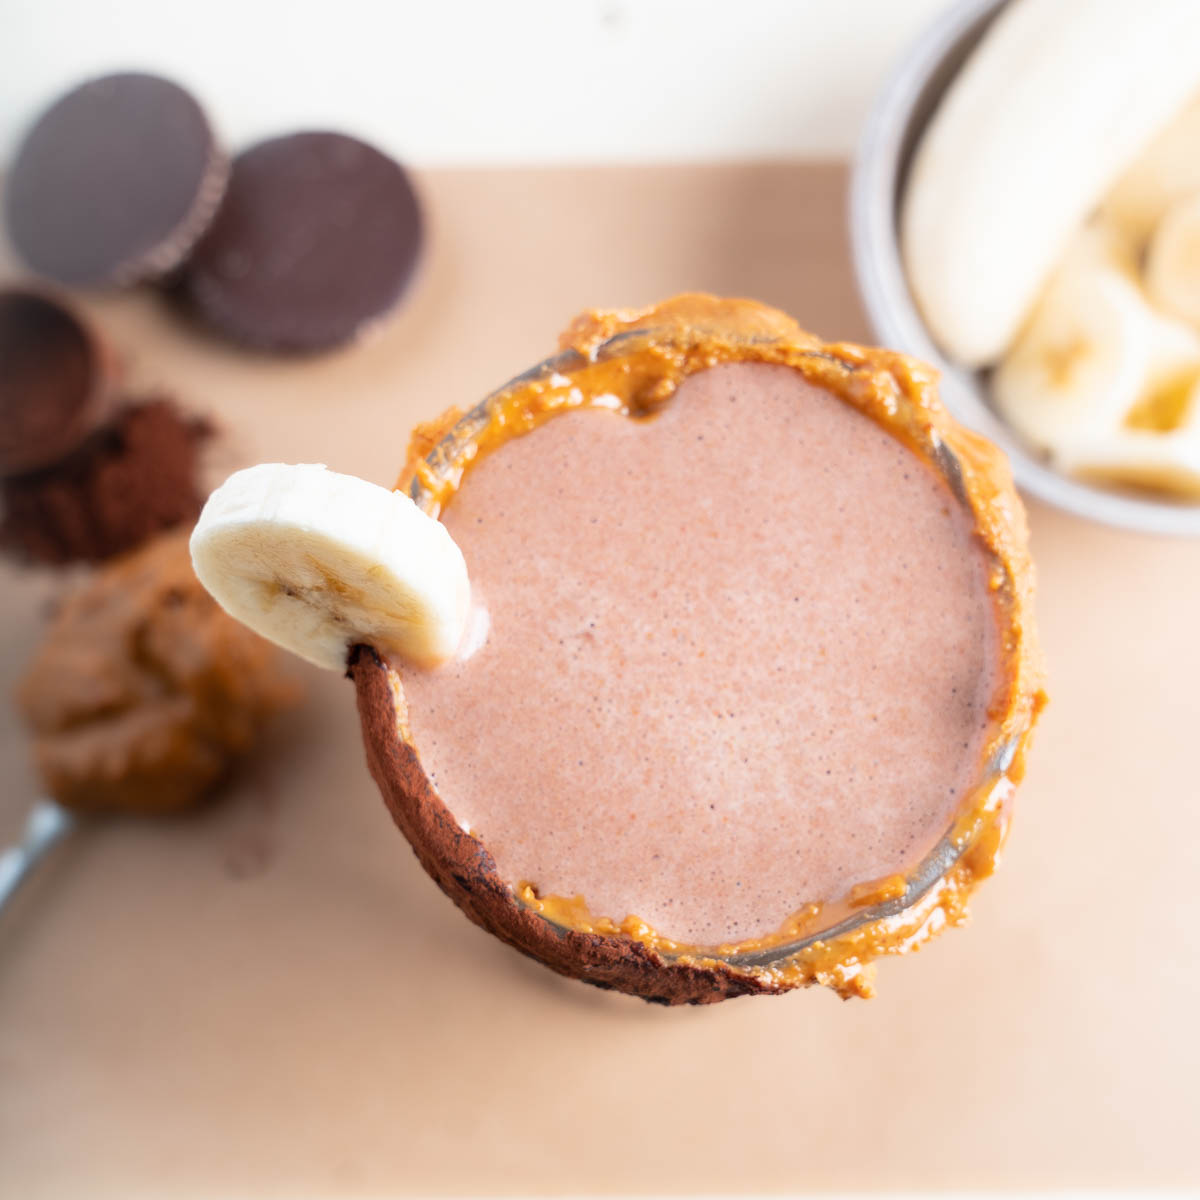 Dark Brown Peanut Butter Chocolate Smoothie with peanut butter cocoa powder rim. The props show the healthy ingredients used in the smoothie